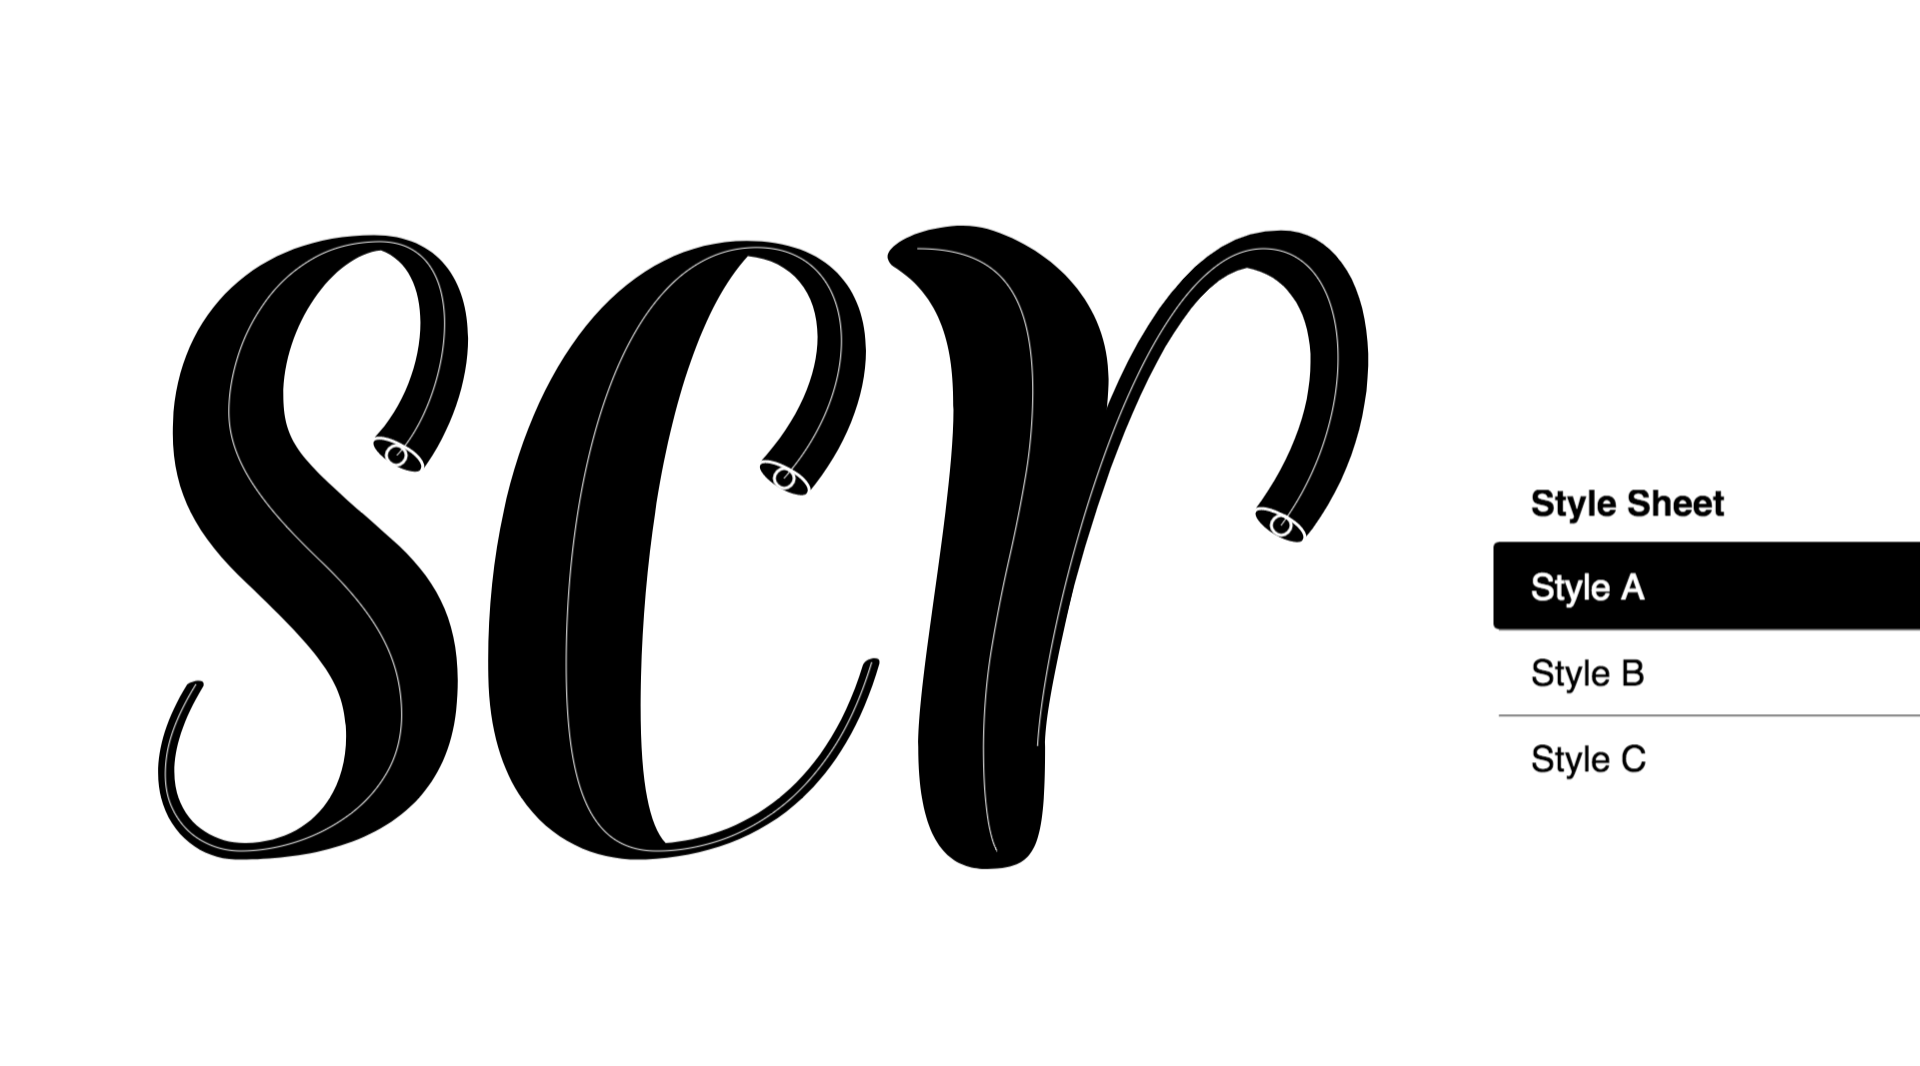 Save brush style, reuse brush style, and edit results in the real-time across the whole project. Skeleton type design brush extension for Glyphsapp. 